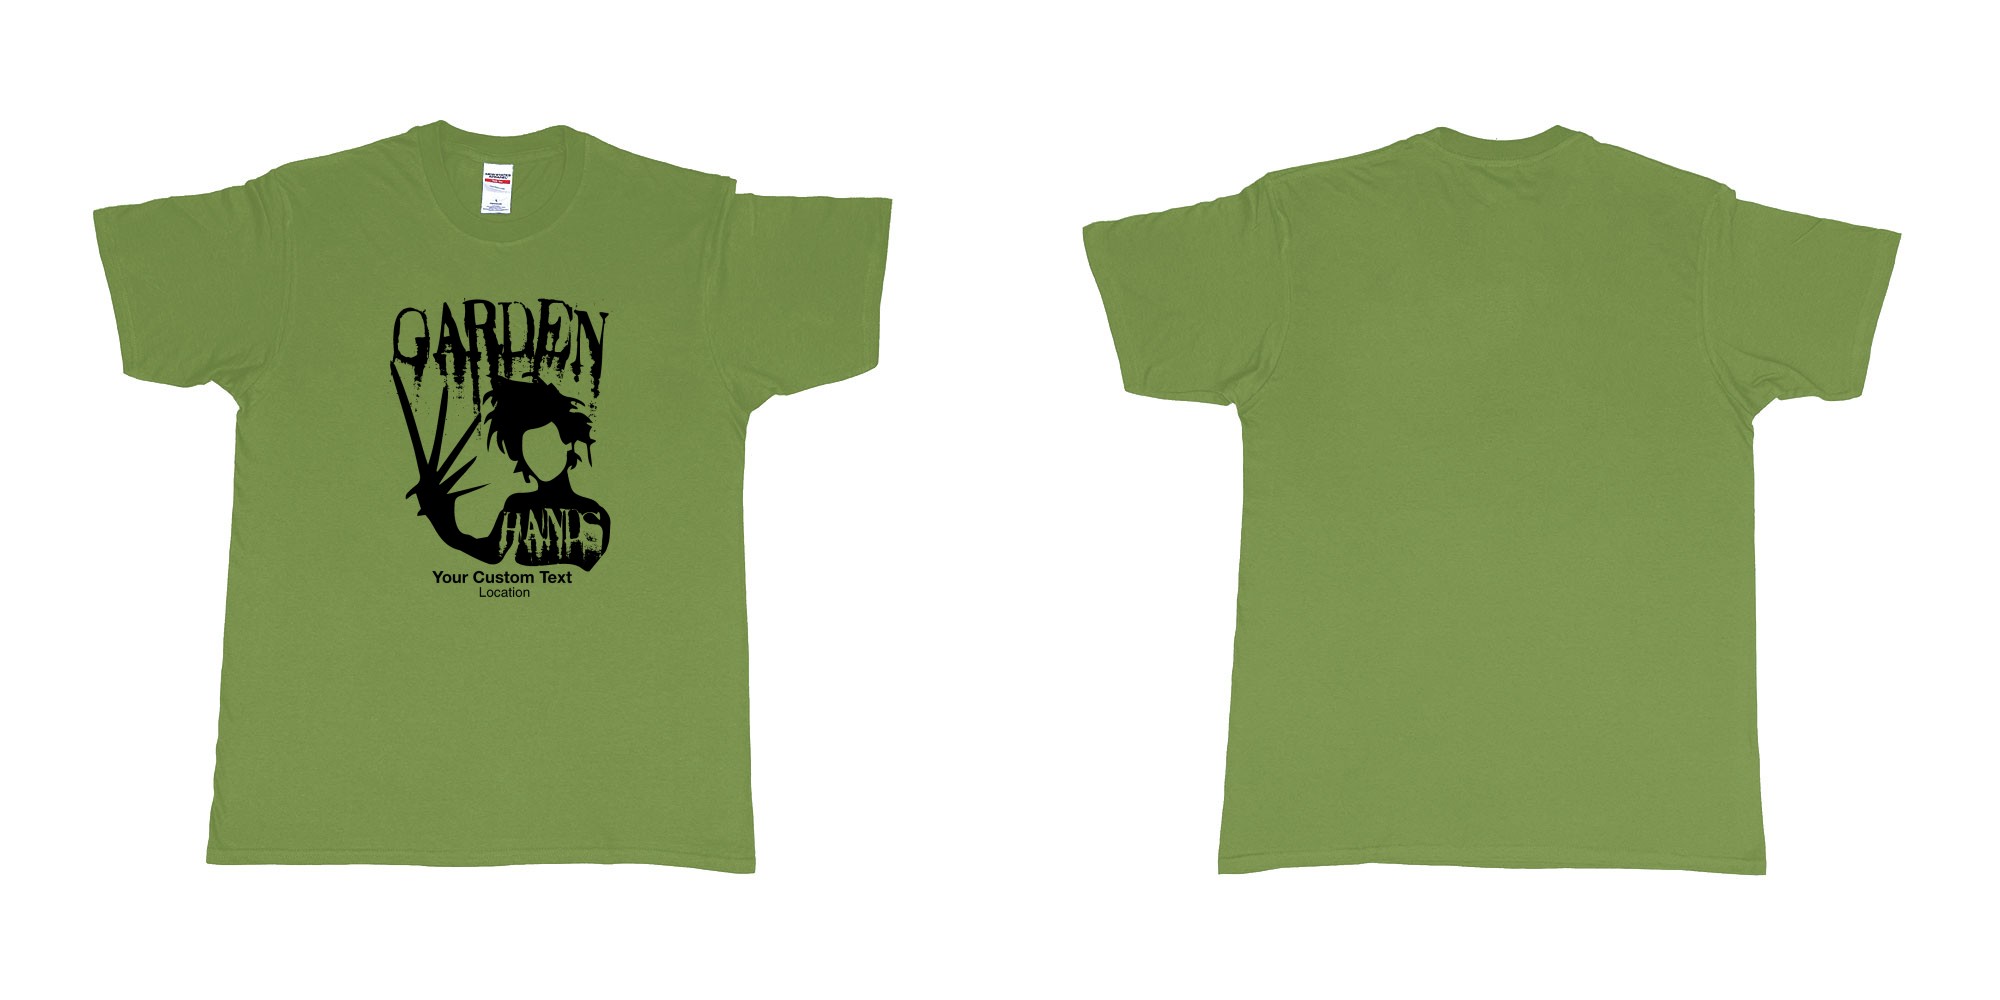 Custom tshirt design garden hands edward scissorhands custom design in fabric color military-green choice your own text made in Bali by The Pirate Way